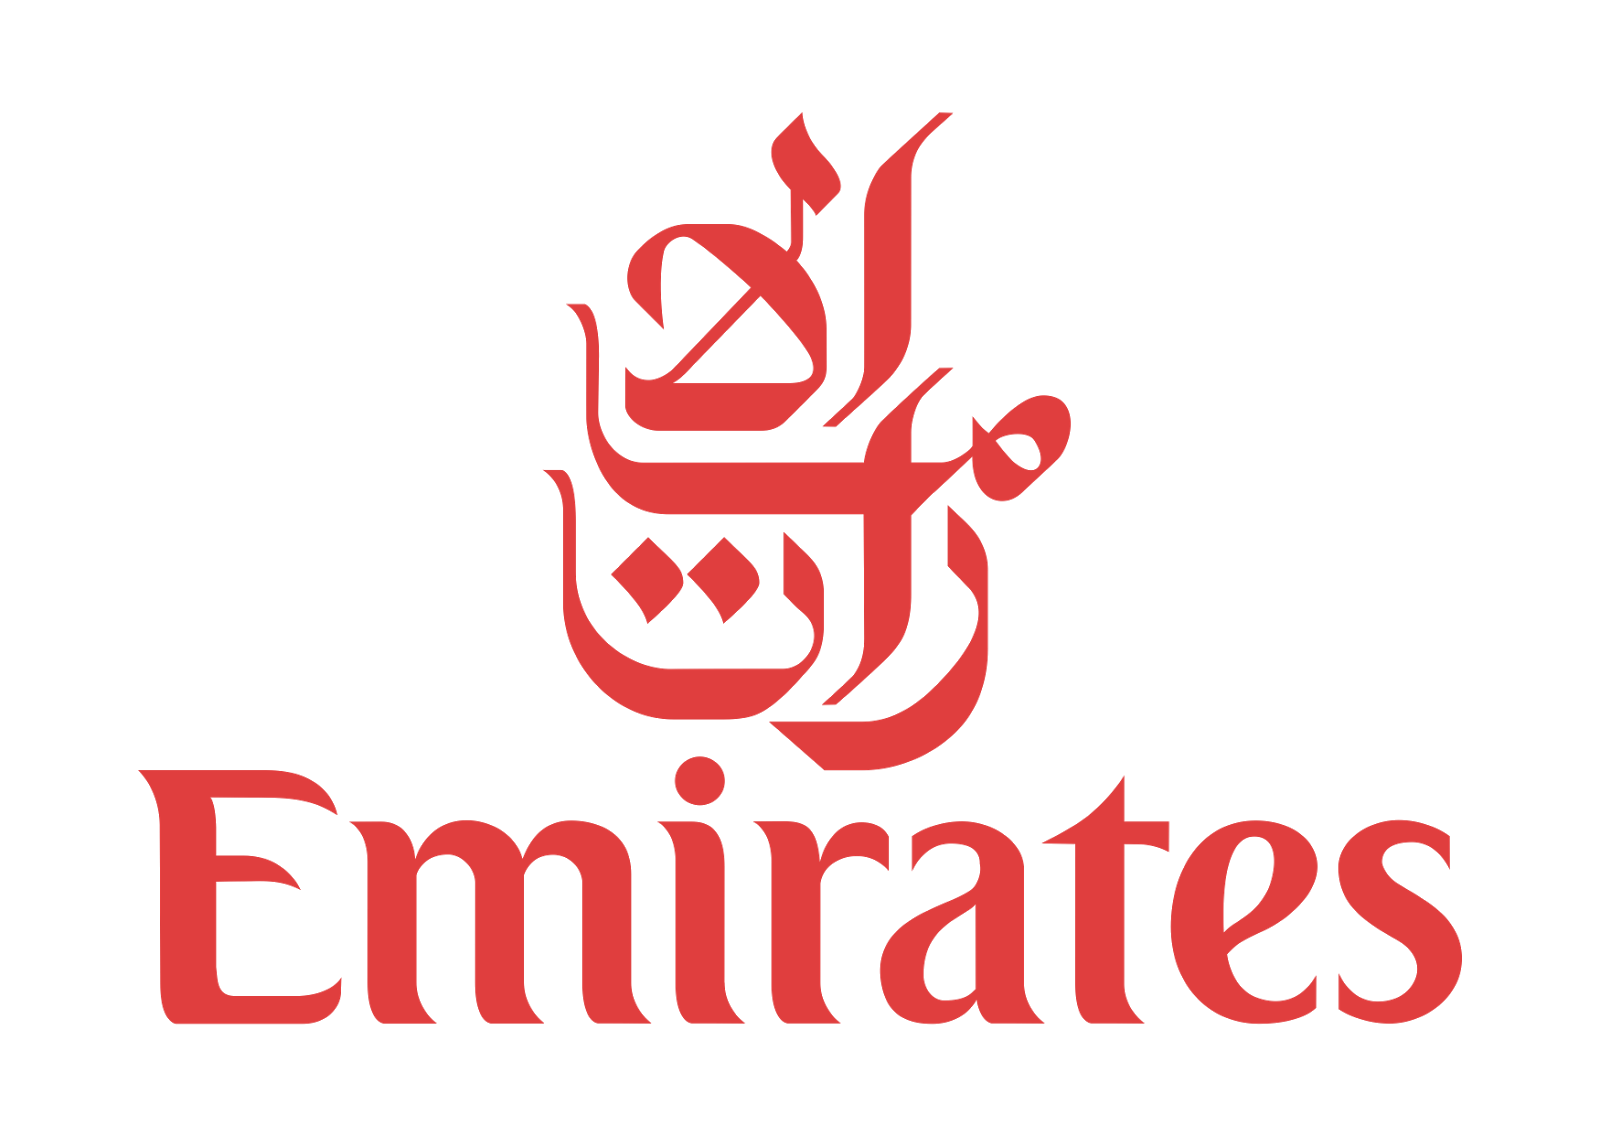 pin Airplane clipart emirates